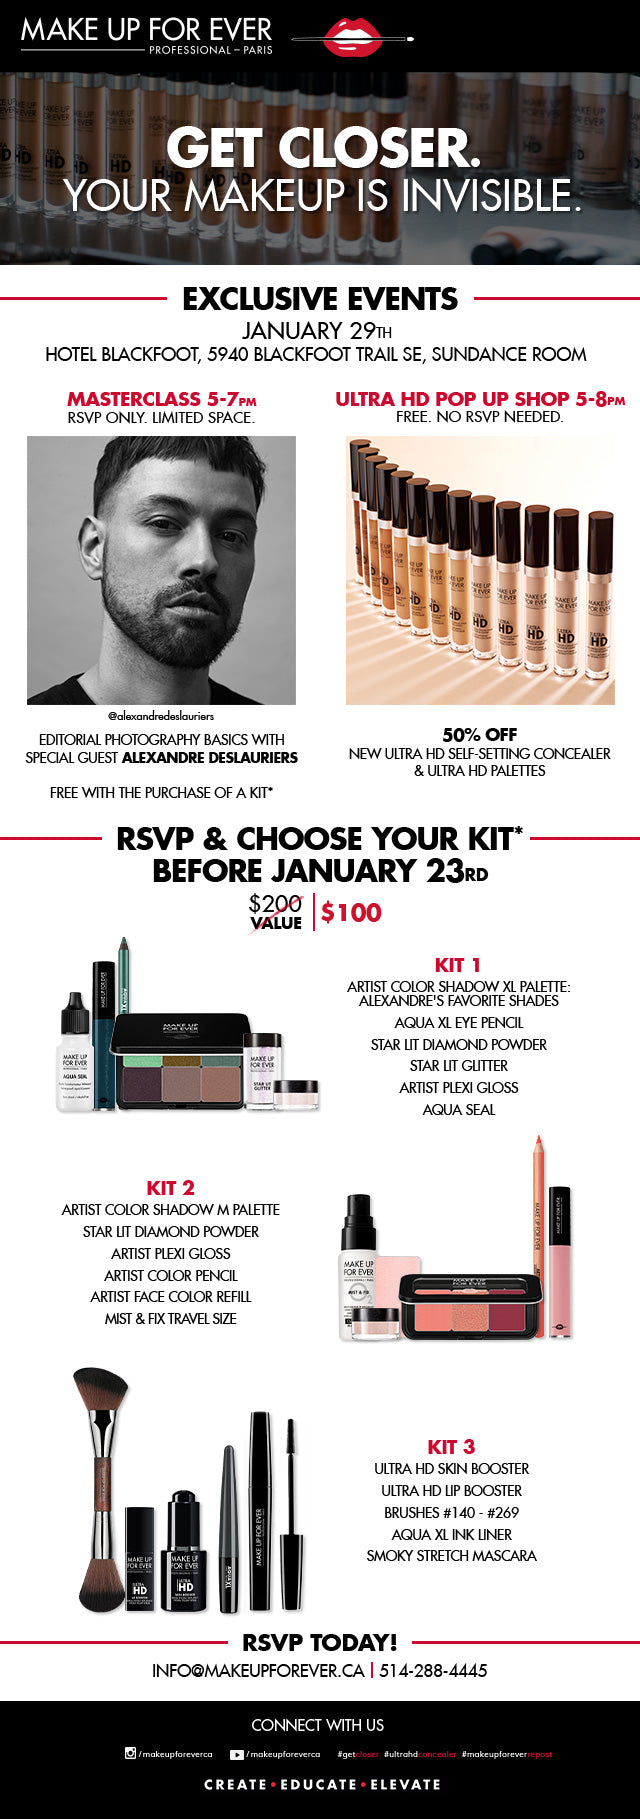 MAKE UP FOR EVER Exclusive Masterclass & Ultra HD Pop-up Shop